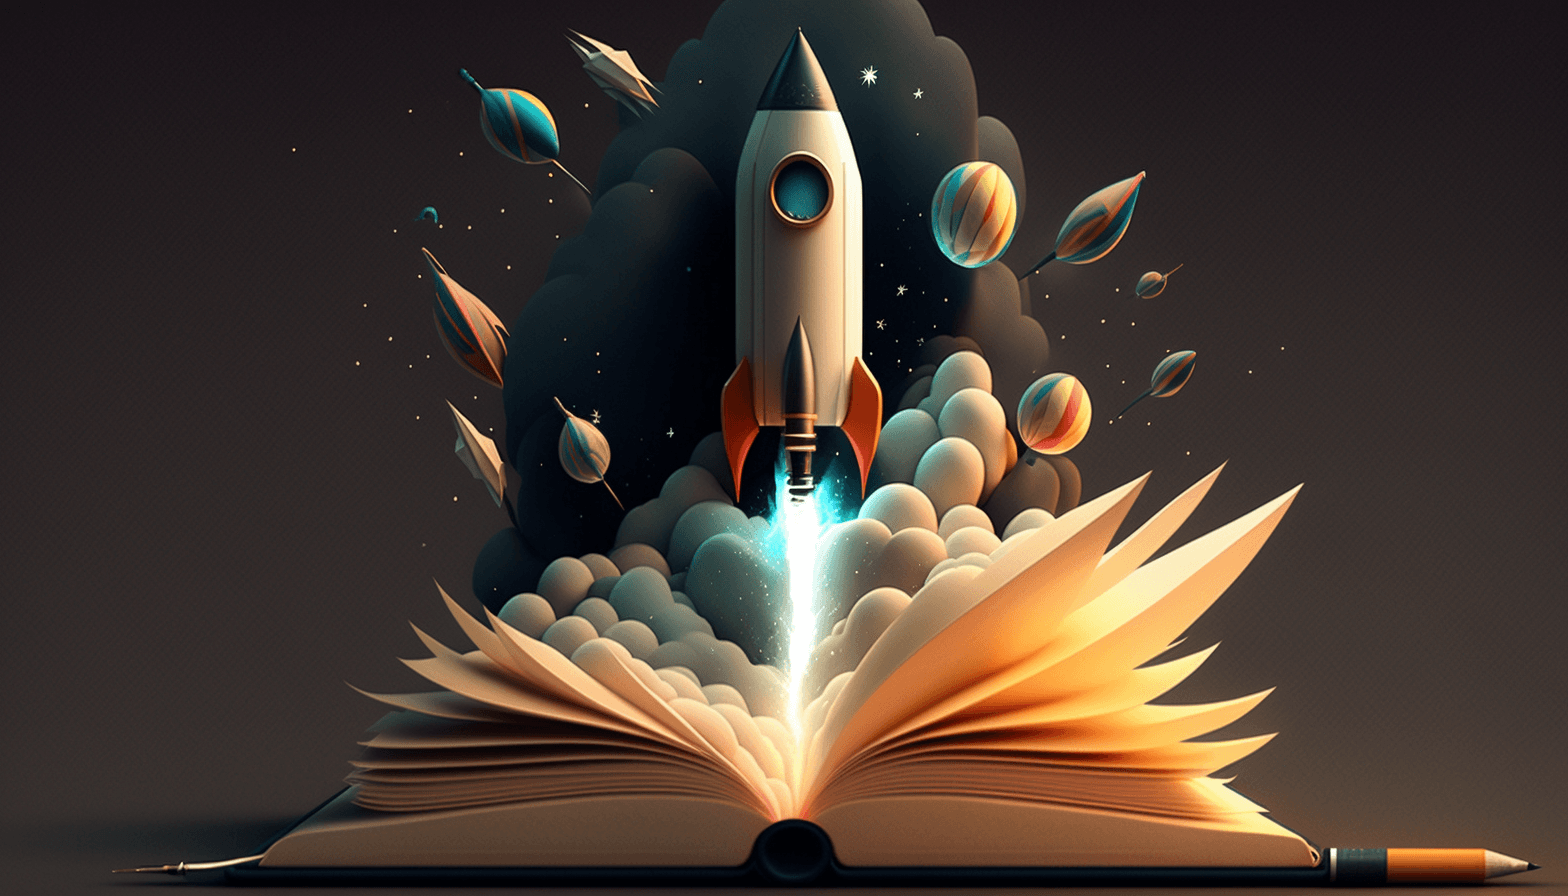 Rocket launching from a diary Illustration